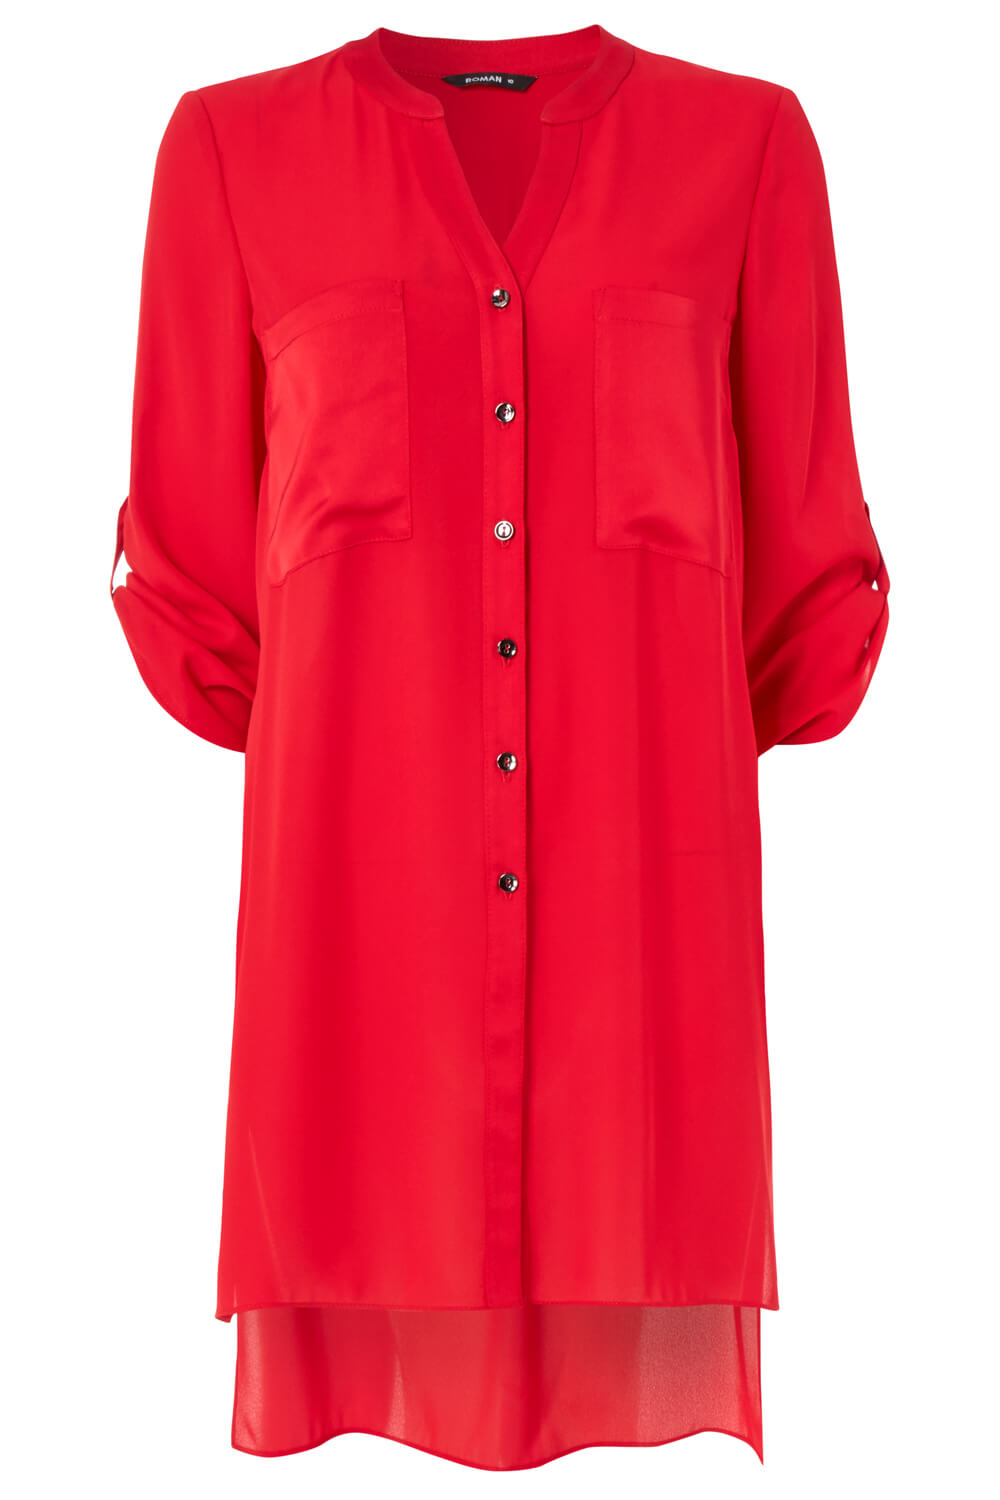 Red Longline Button Through Blouse, Image 5 of 5